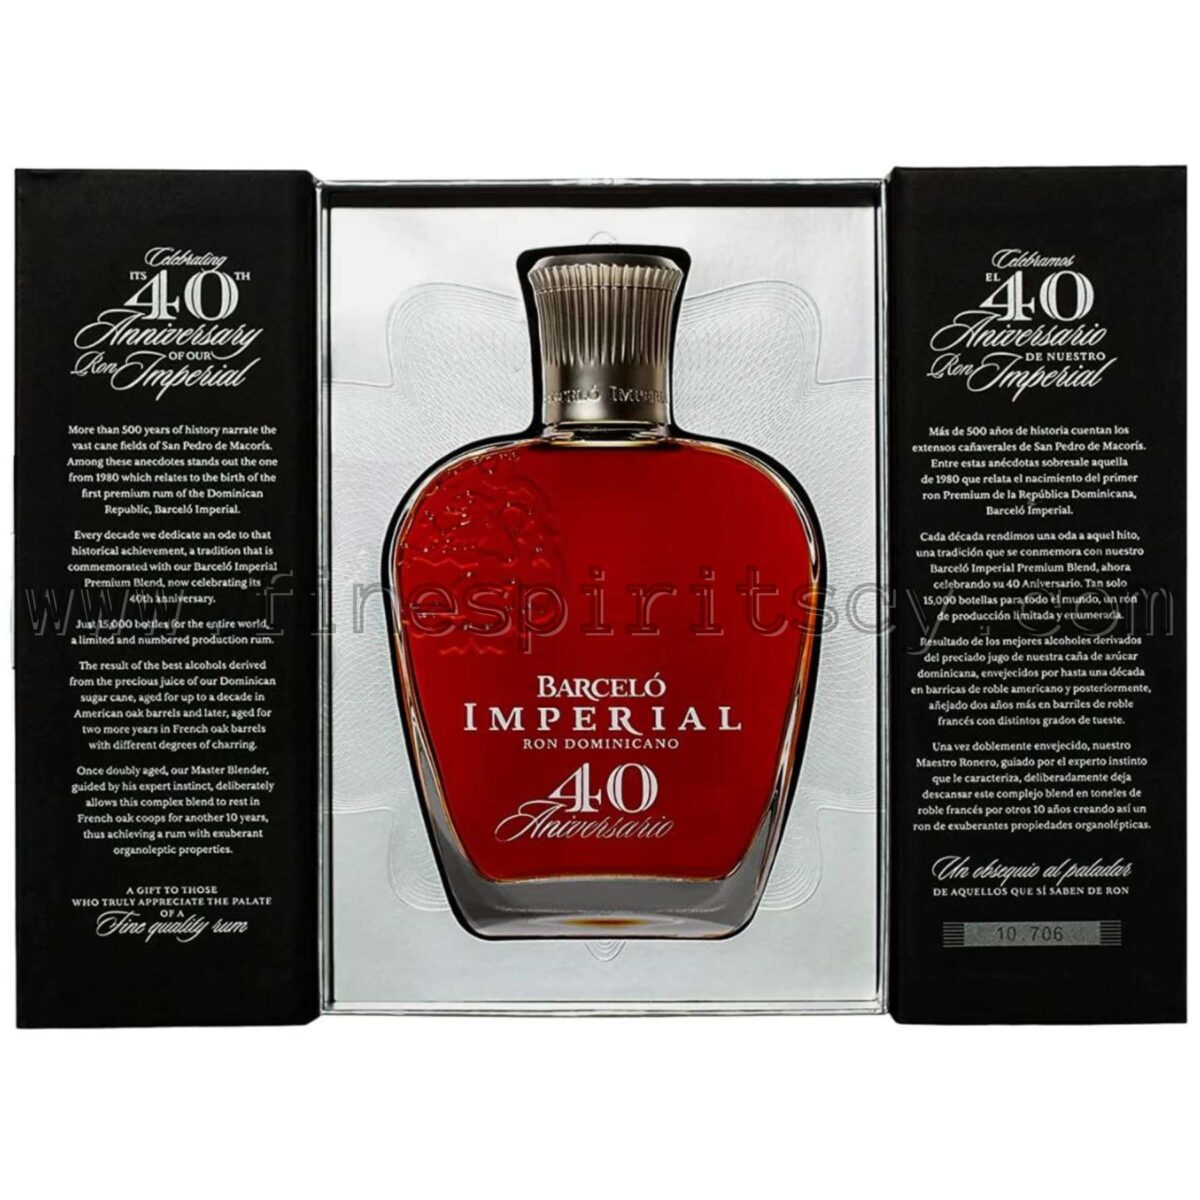 Barcelo Imperial Cyprus CY 40 Anniversario 700ml collectable rare old discontinued